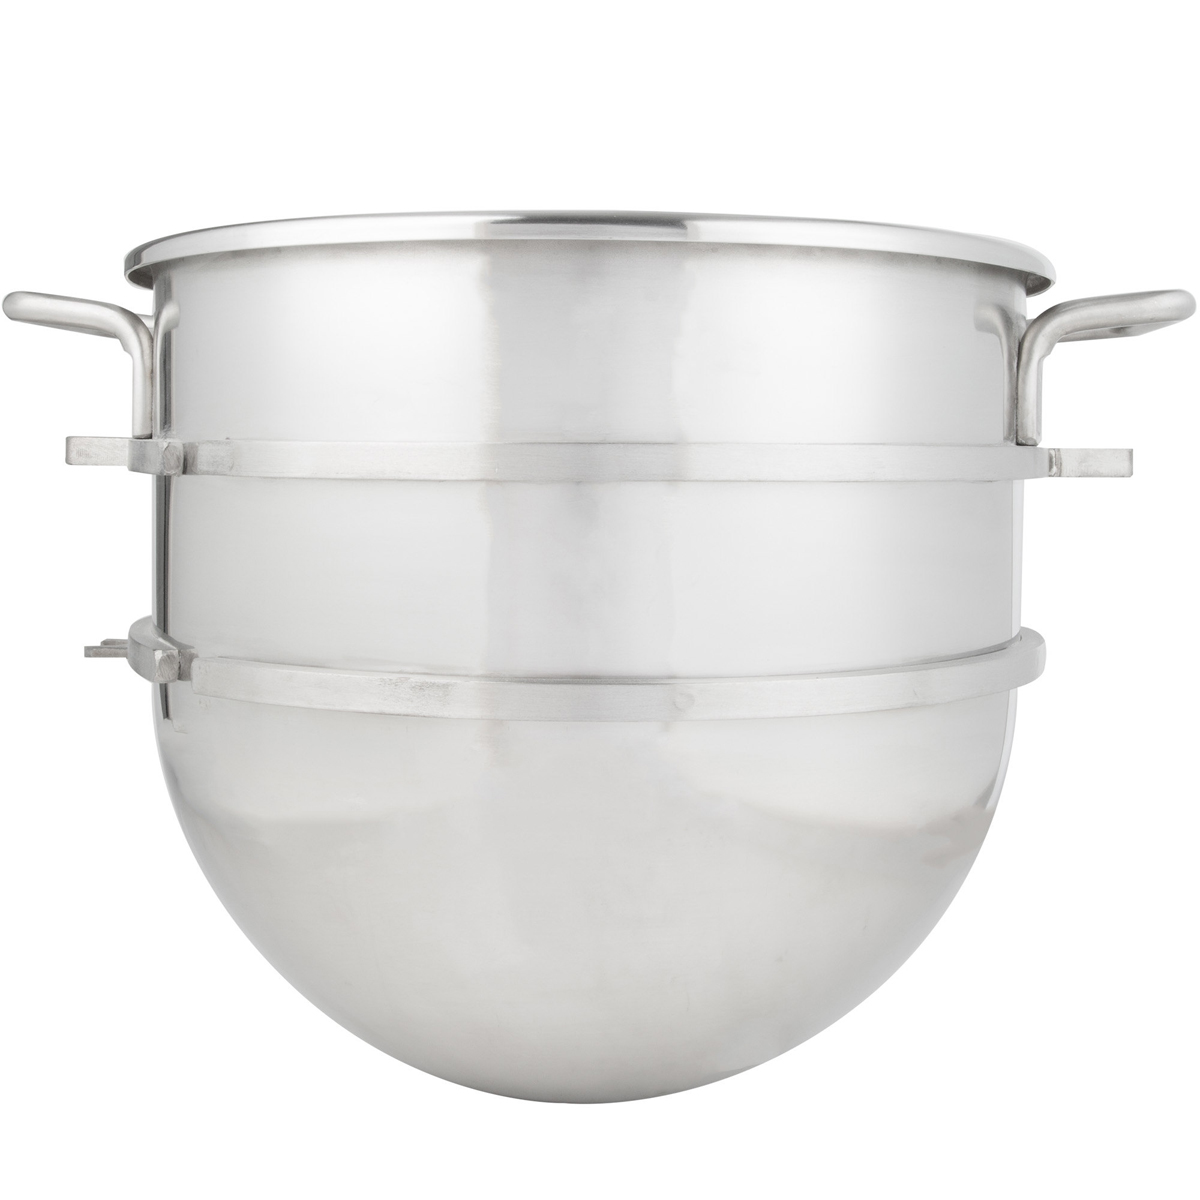 Hobart BOWL-HL80 80 Qt. Stainless Steel Mixing Bowl image 1